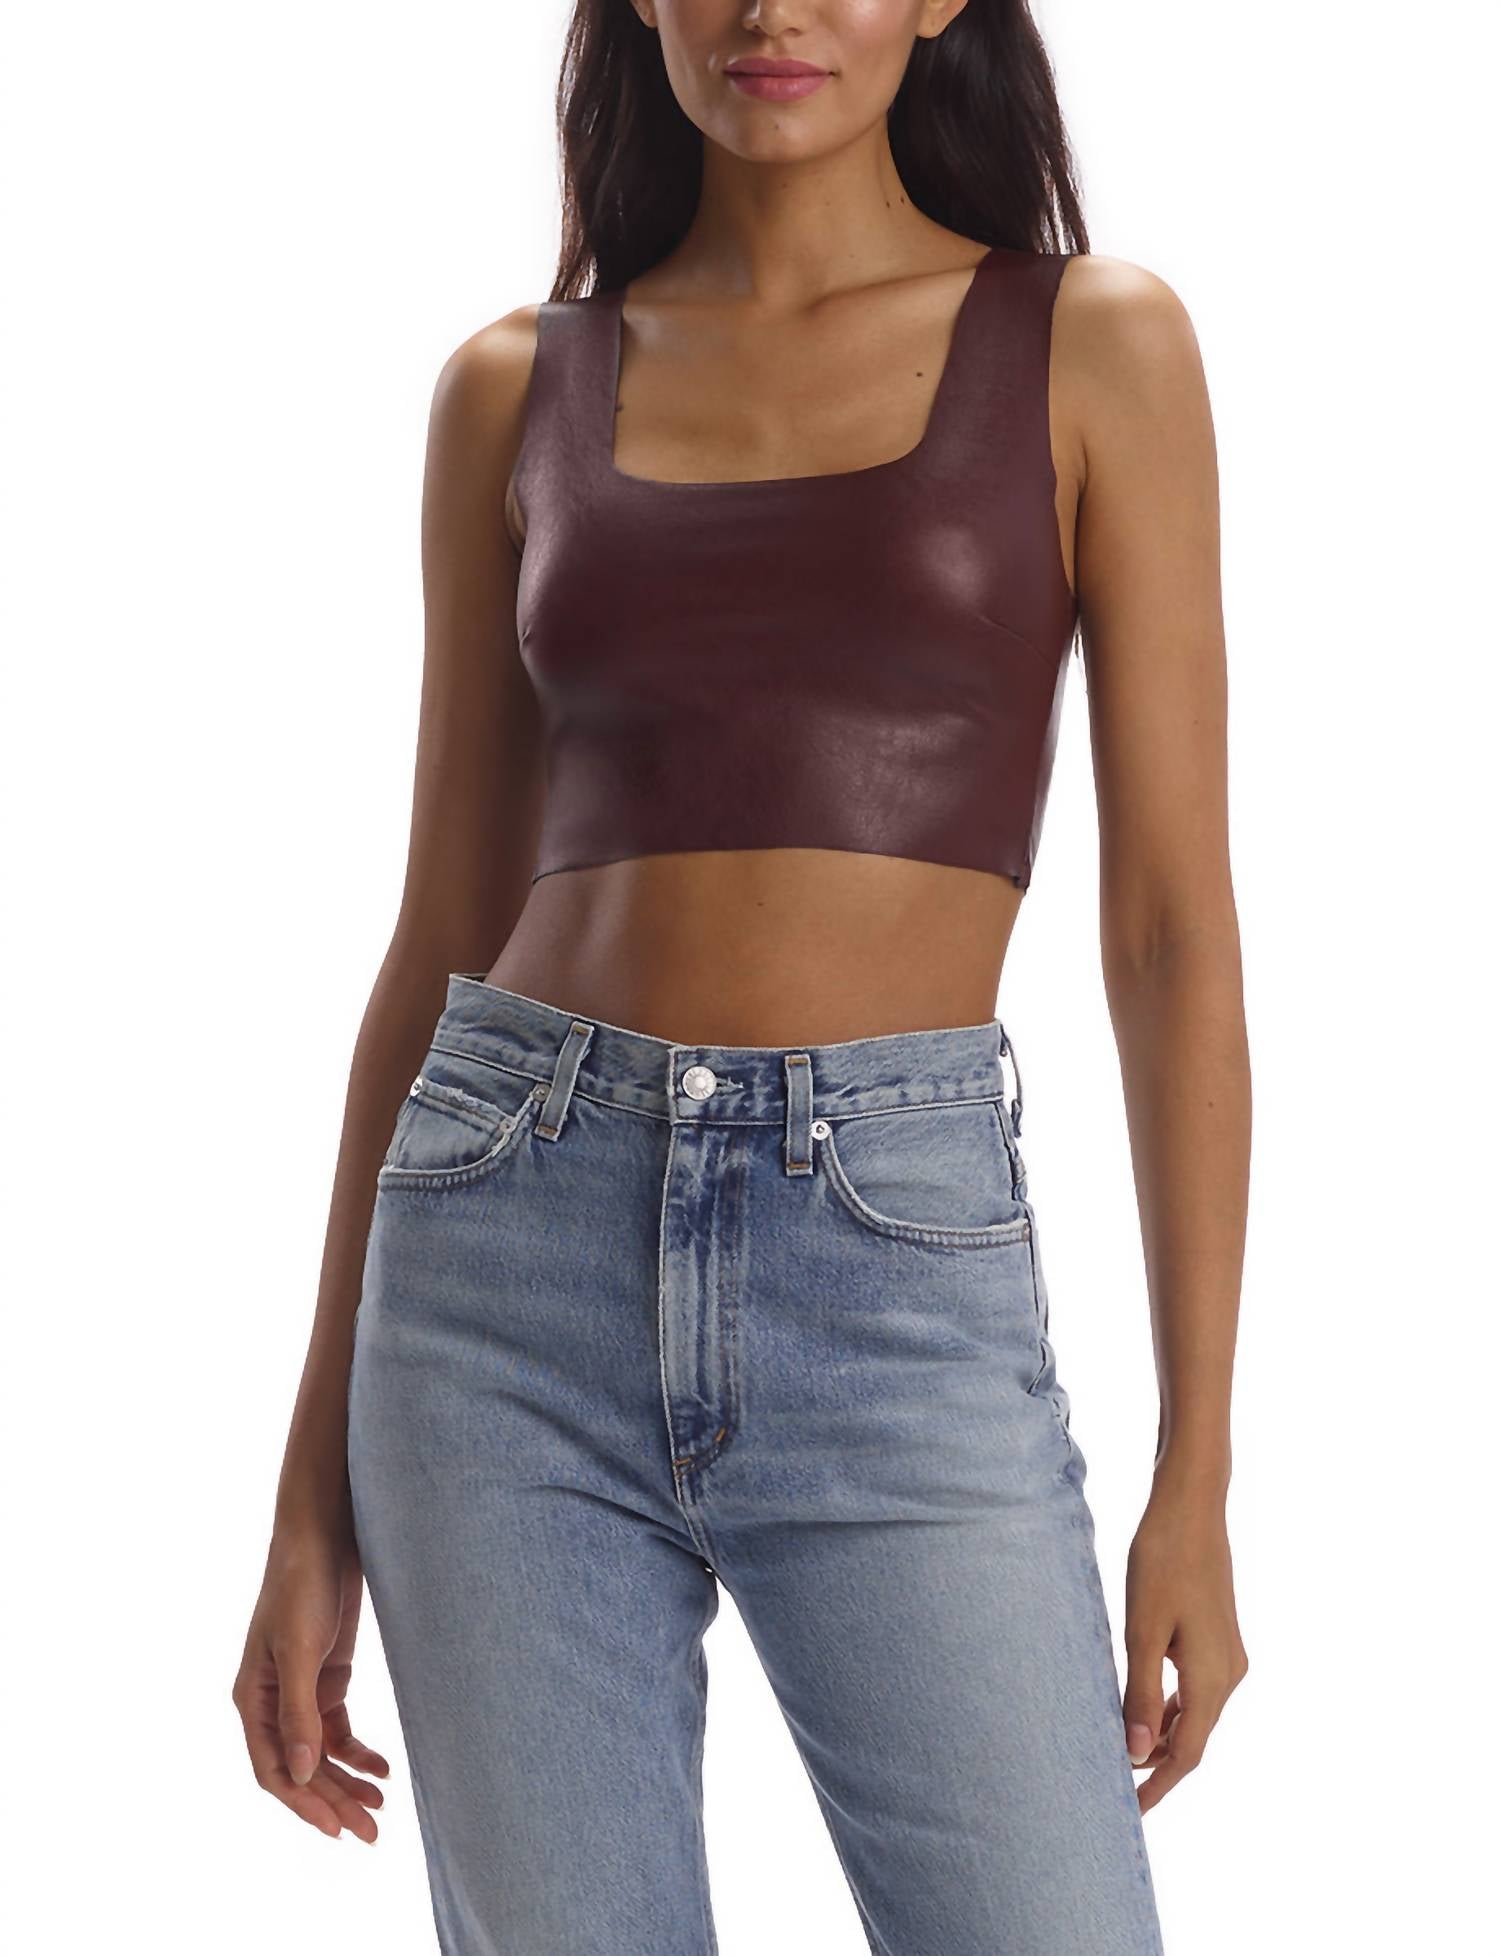 Commando faux leather squareneck crop top in red